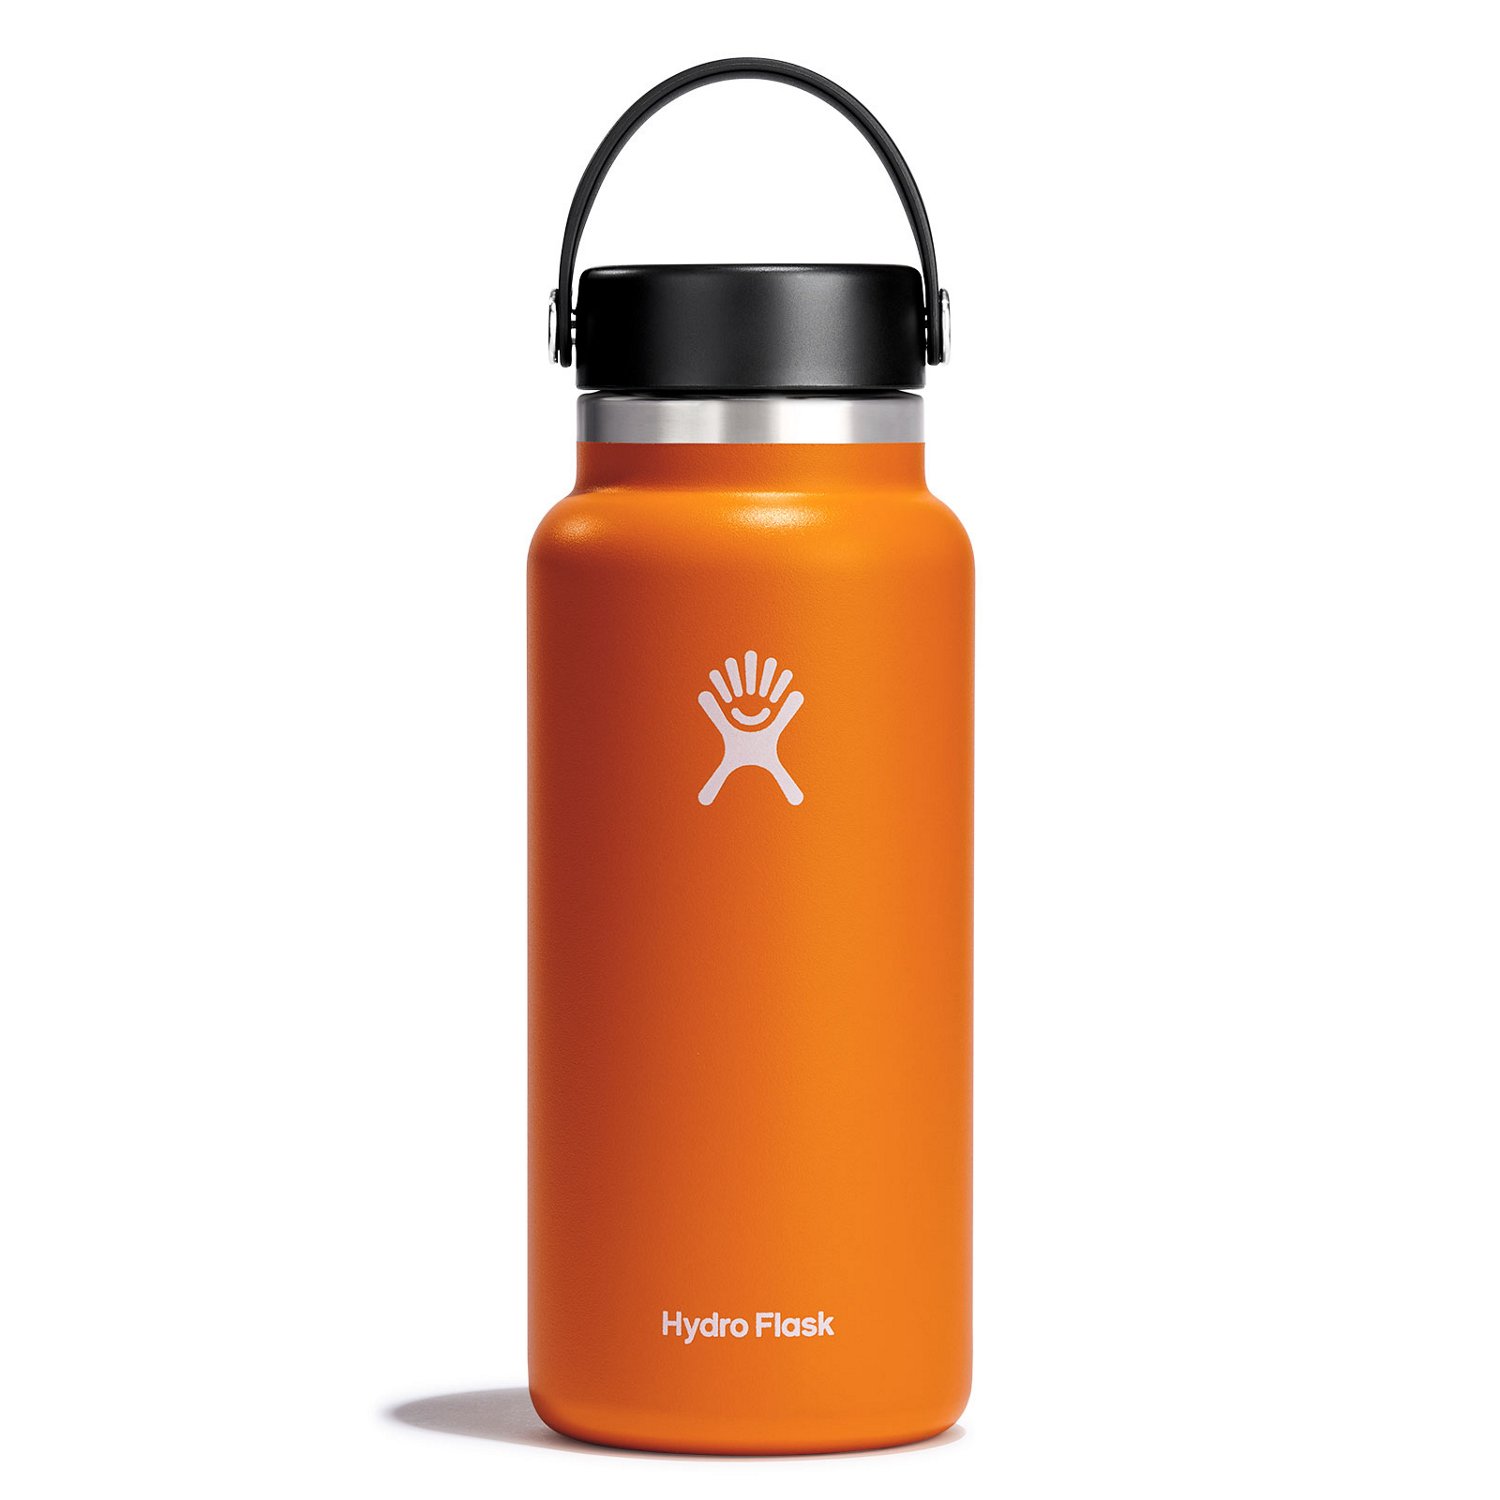 https://academy.scene7.com/is/image/academy///camping/drinkware/orange_hydro-flask-wide-mouth-2.0-32-oz-bottle-with-flex-cap_w32bts808/4f0e97eee4de4e2aa6010ba7c2a1acd4